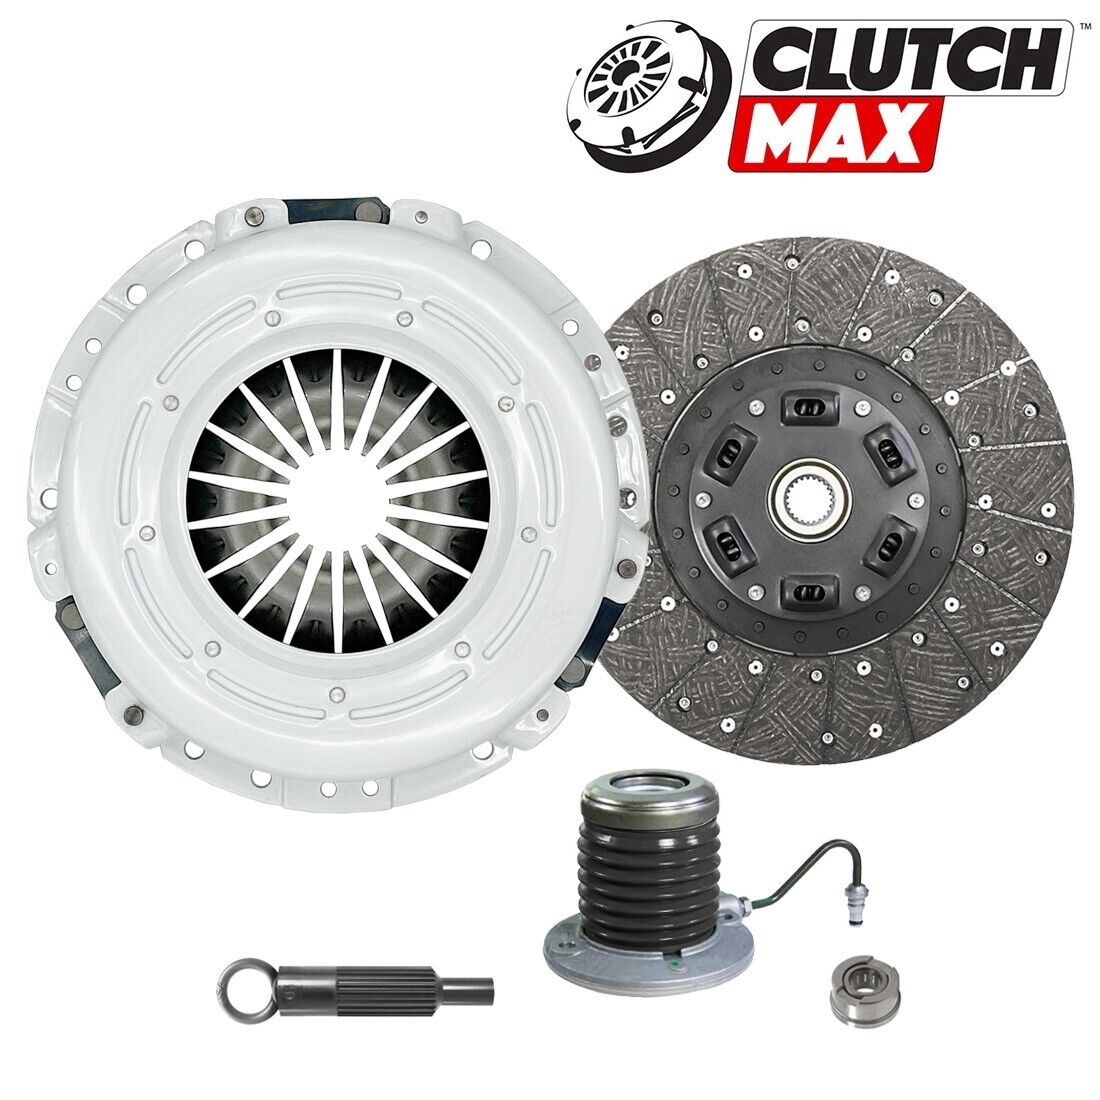 OEM PREMIUM CLUTCH KIT+SLAVE fits 2011-2017 FORD MUSTANG GT BOSS 302 COYOTE 5.0L